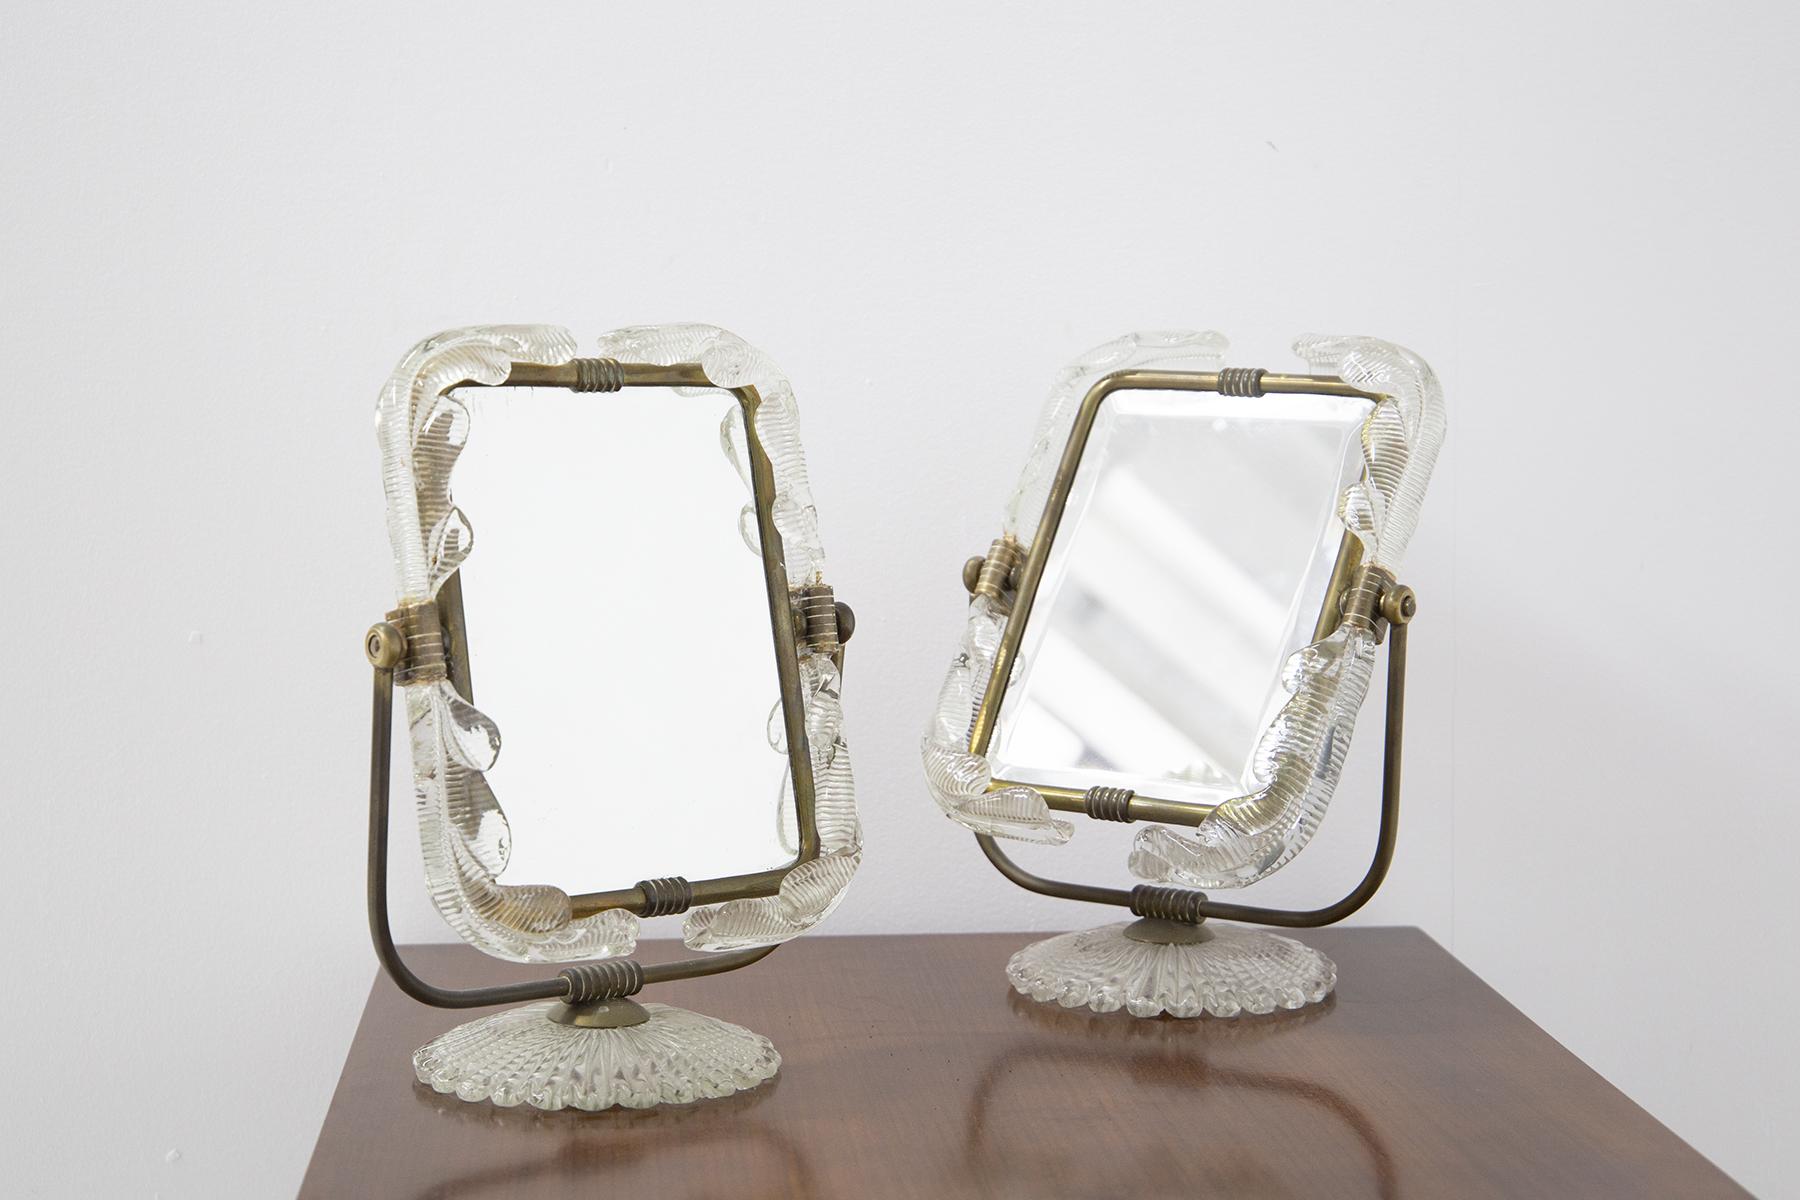 Spectacular pair of 1950's Italian table mirrors made by Barovier and Toso. The pair of mirrors can also serve as vanity mirrors for a makeup desk. The mirrors also have a dual function, if you turn the mirror around on its inner side we find a